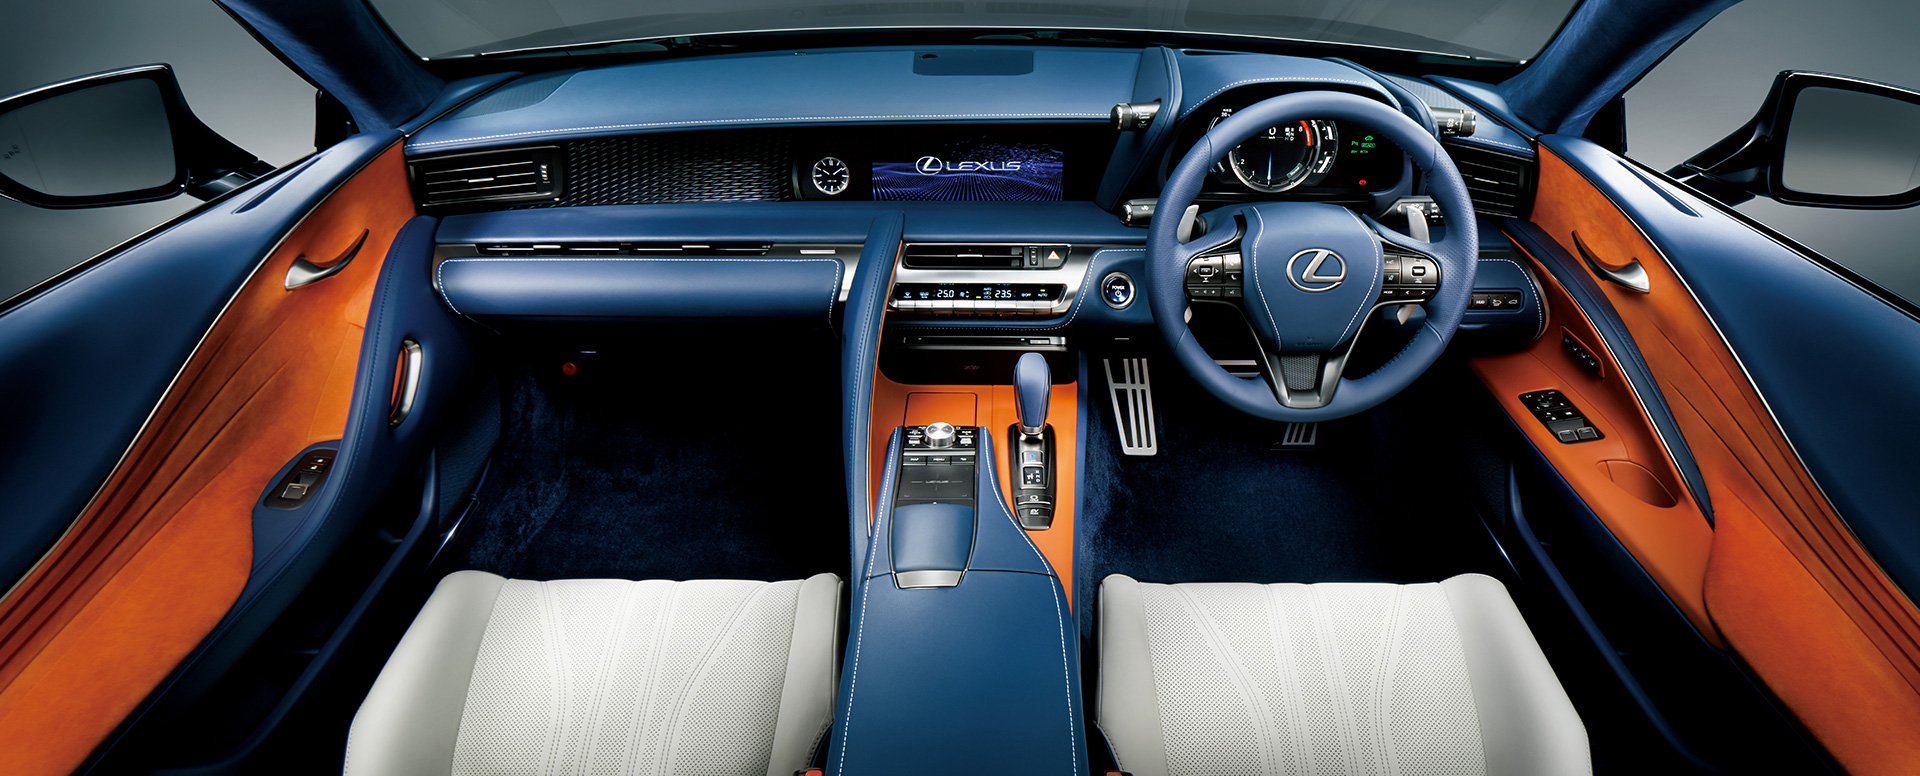 Lc 500 L Package Breezy Blue Interior Color Toyota Motor Corporation Official Global Website